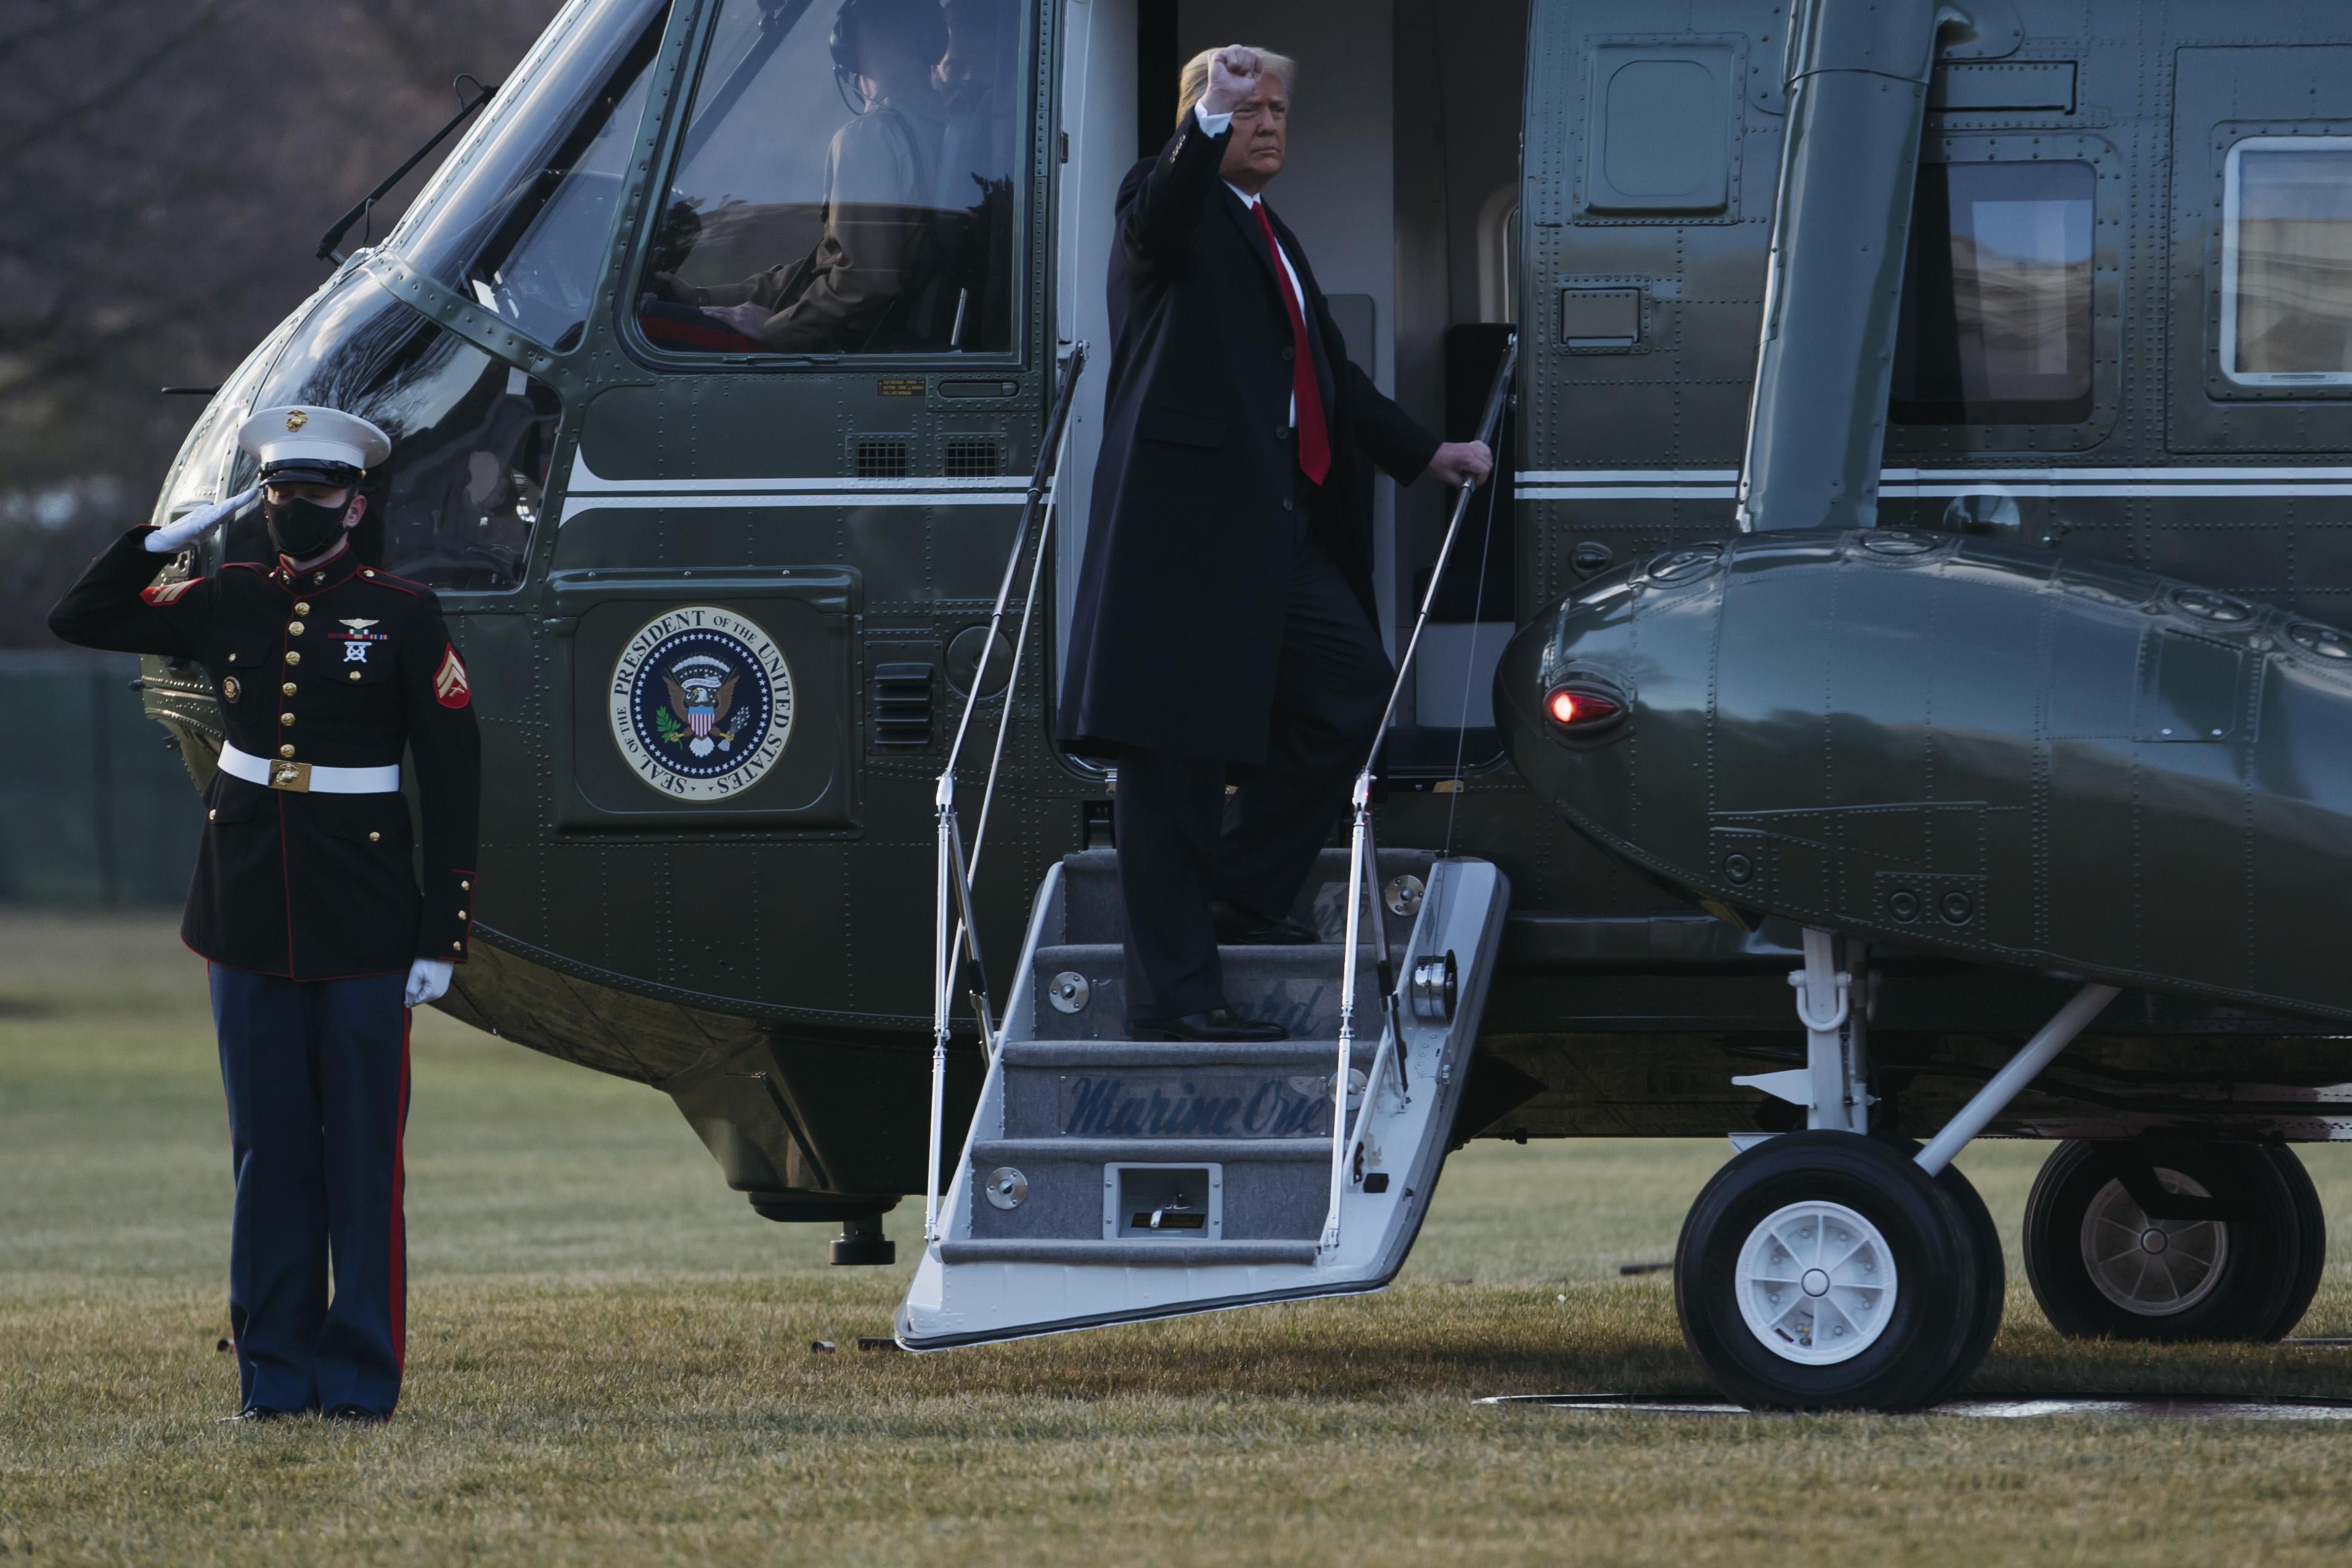 Donald Trump raises his fist to an audience off-screen as he stands on the stairs to Marine One. A masked Marine stands next to the helicopter, saluting.